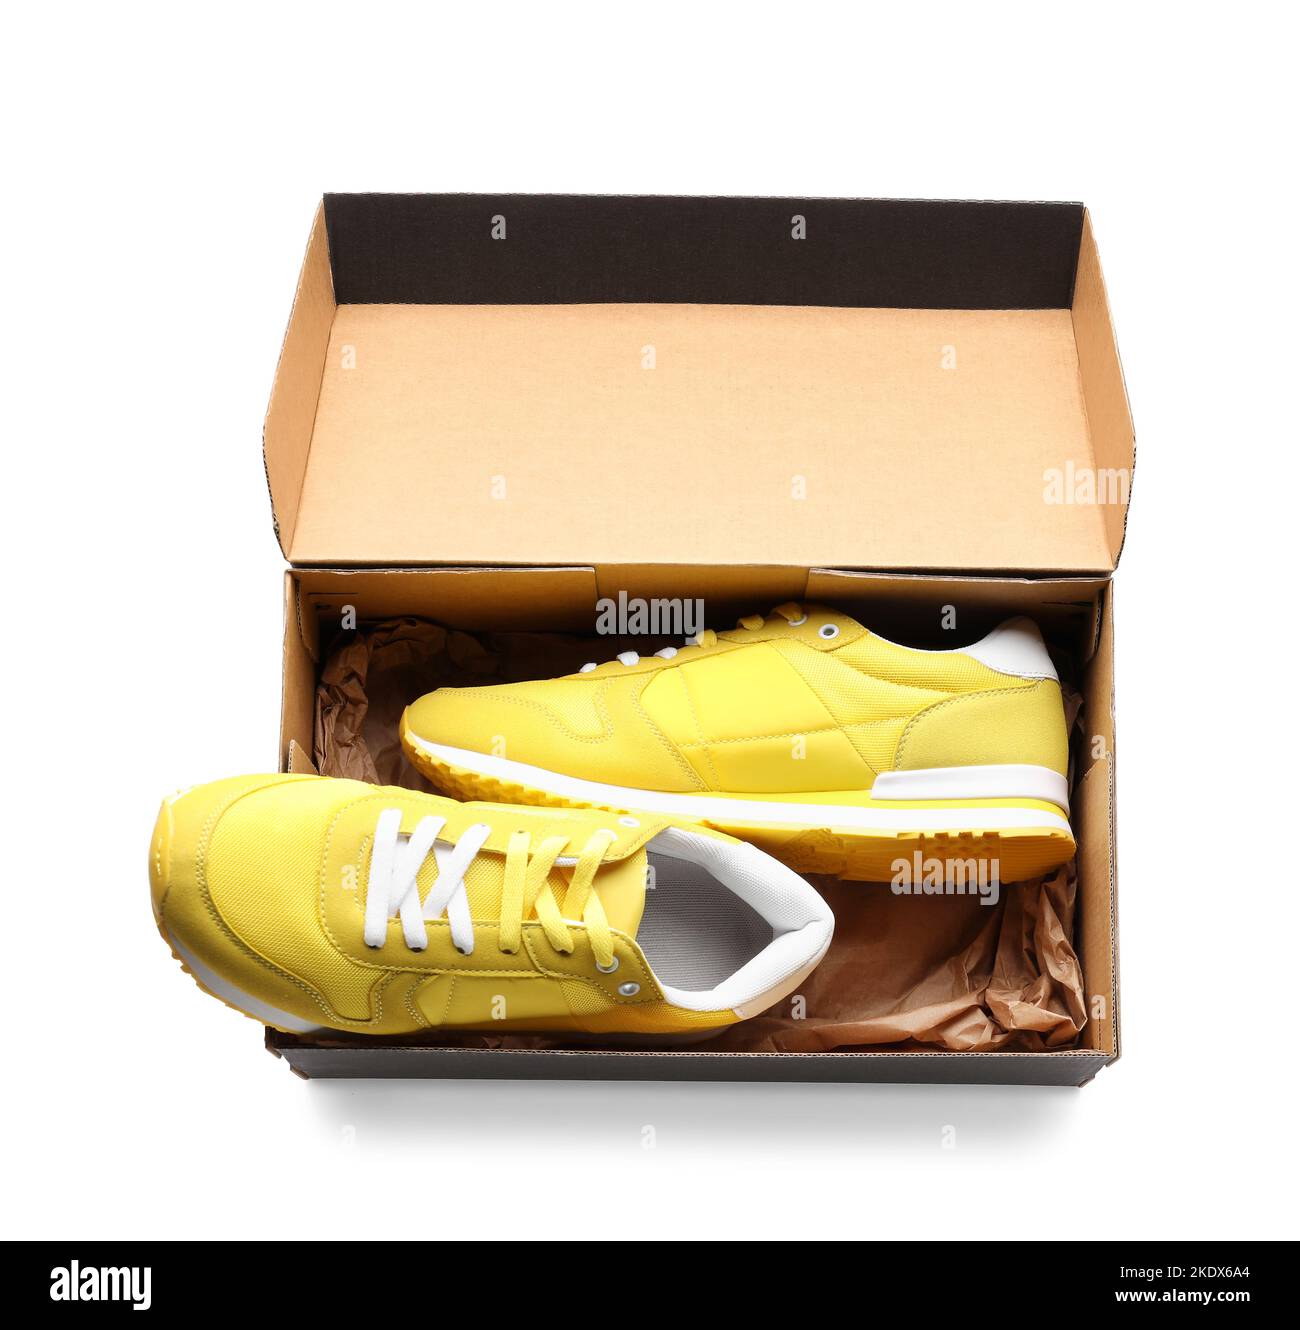 cardboard box with yellow sneakers on white background 2KDX6A4